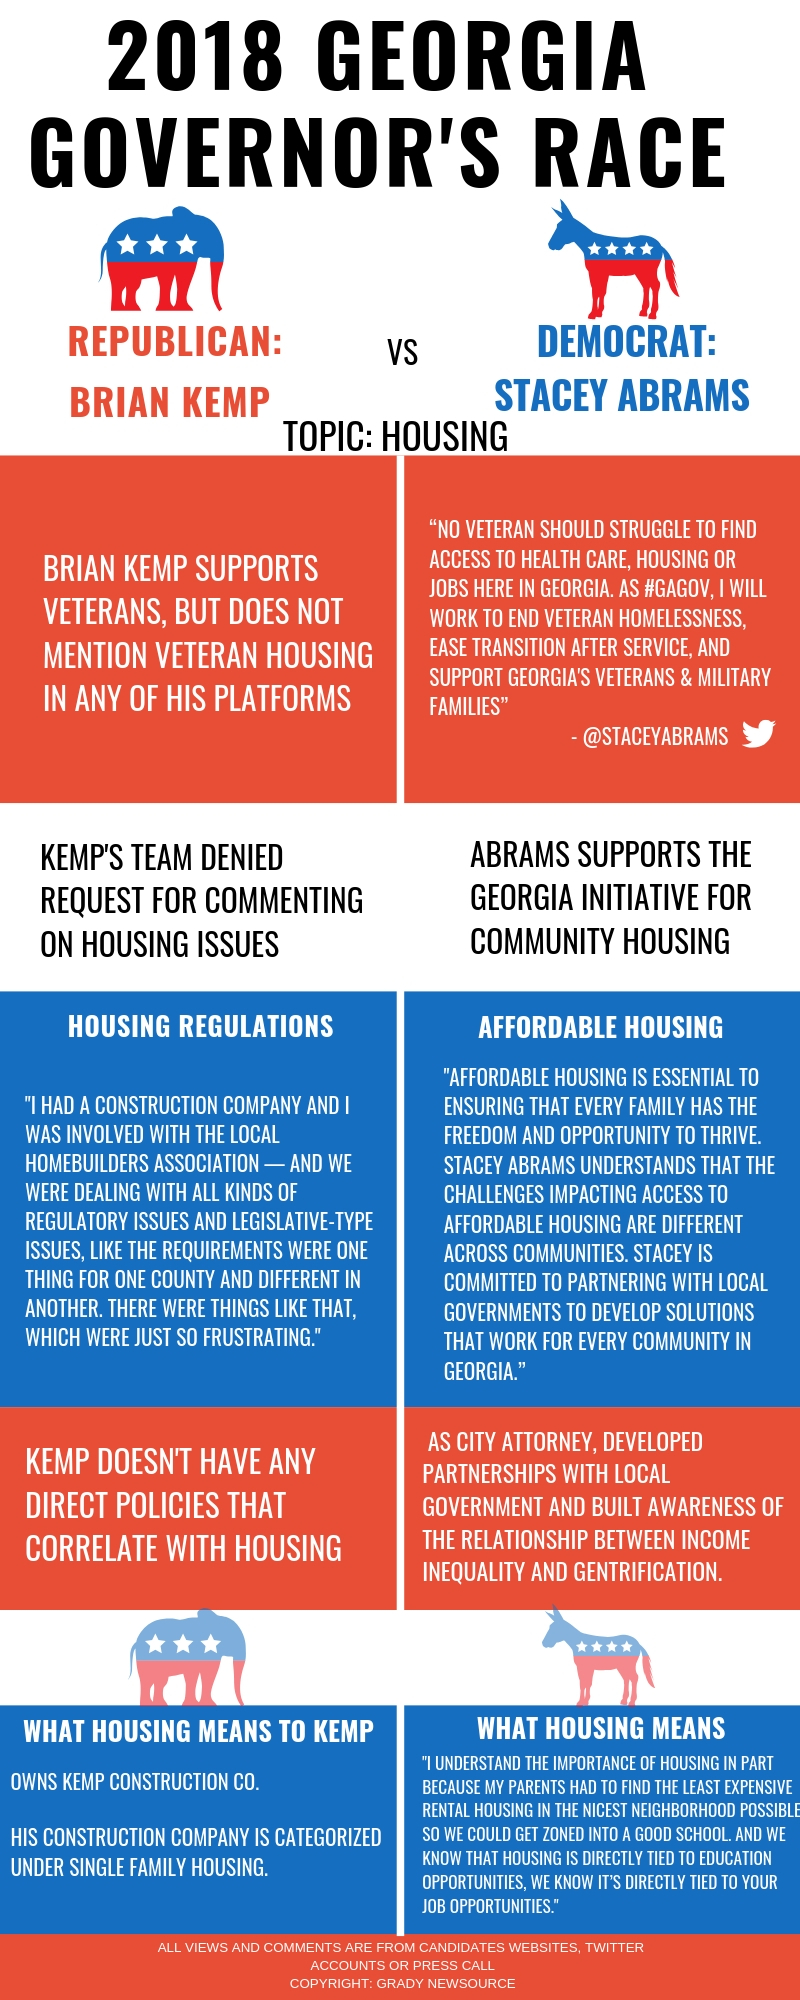 Georgia's Governor's race 2018 housing issues between Democrat candidate Stacey Abrams and Republican candidate Brian Kemp. (Graphic by Savannah Leigh Richardson) 